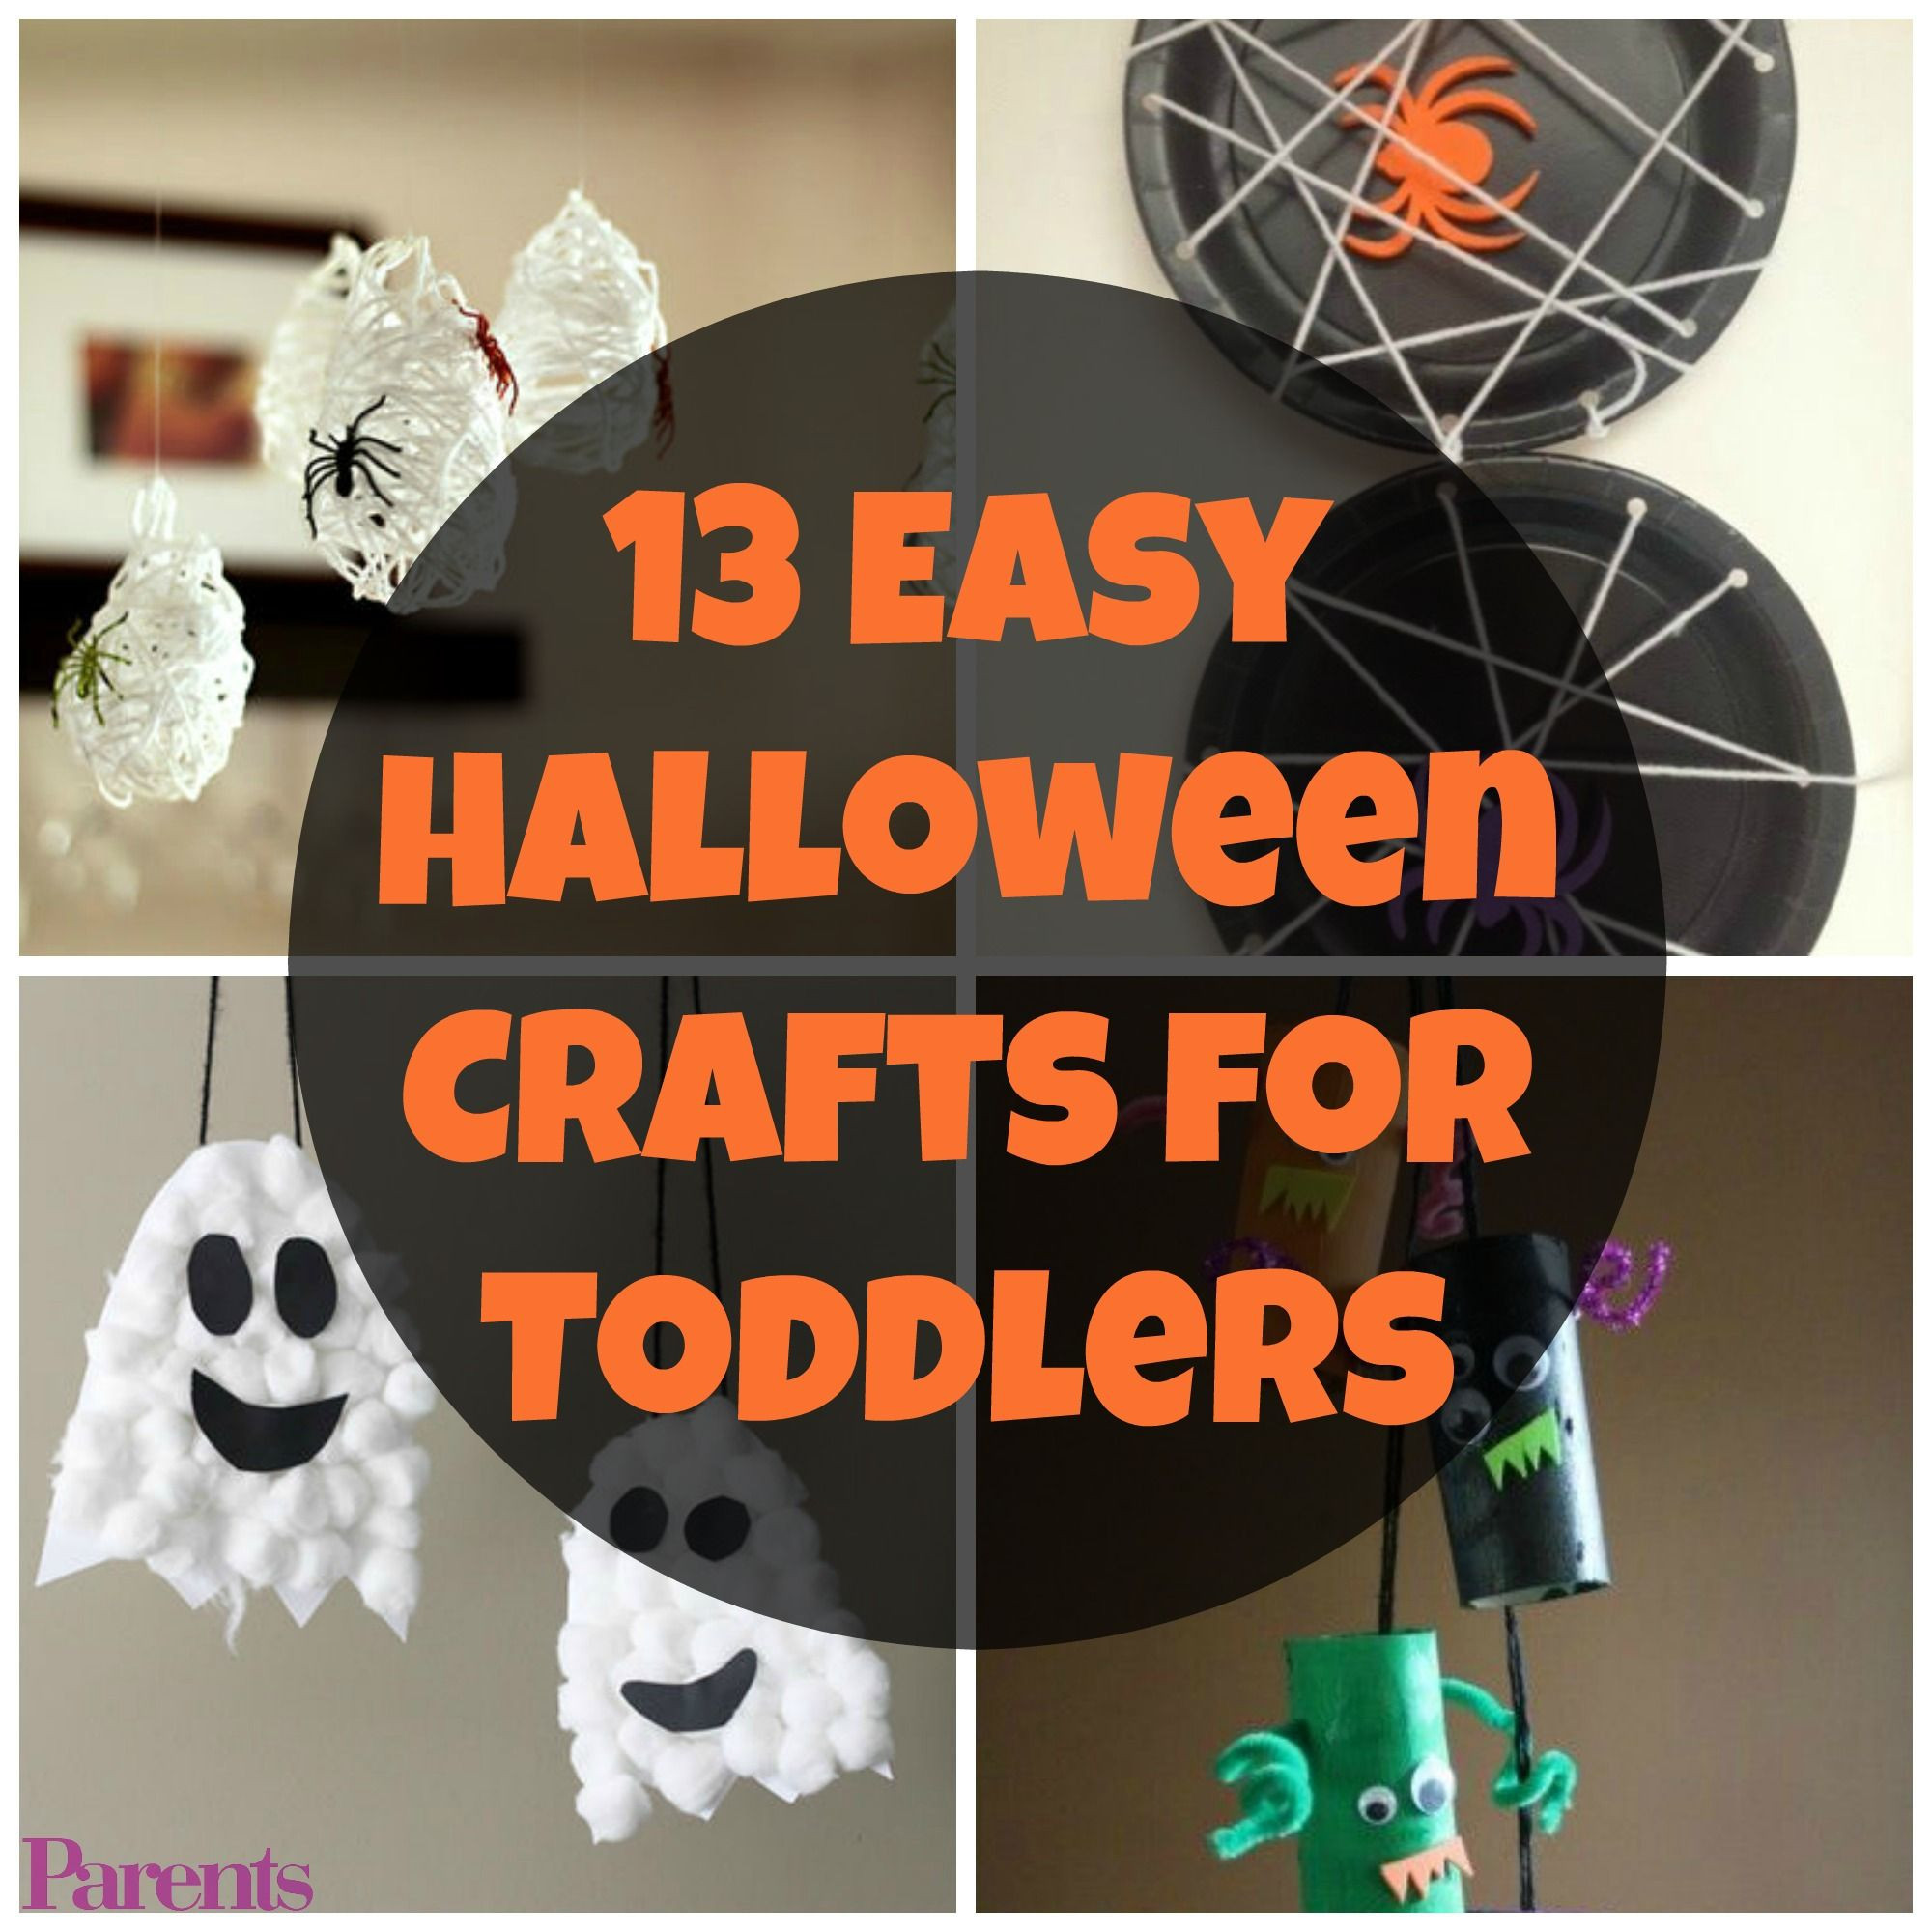 DIY Halloween Crafts For Toddlers
 13 Easy Halloween Crafts for Toddlers